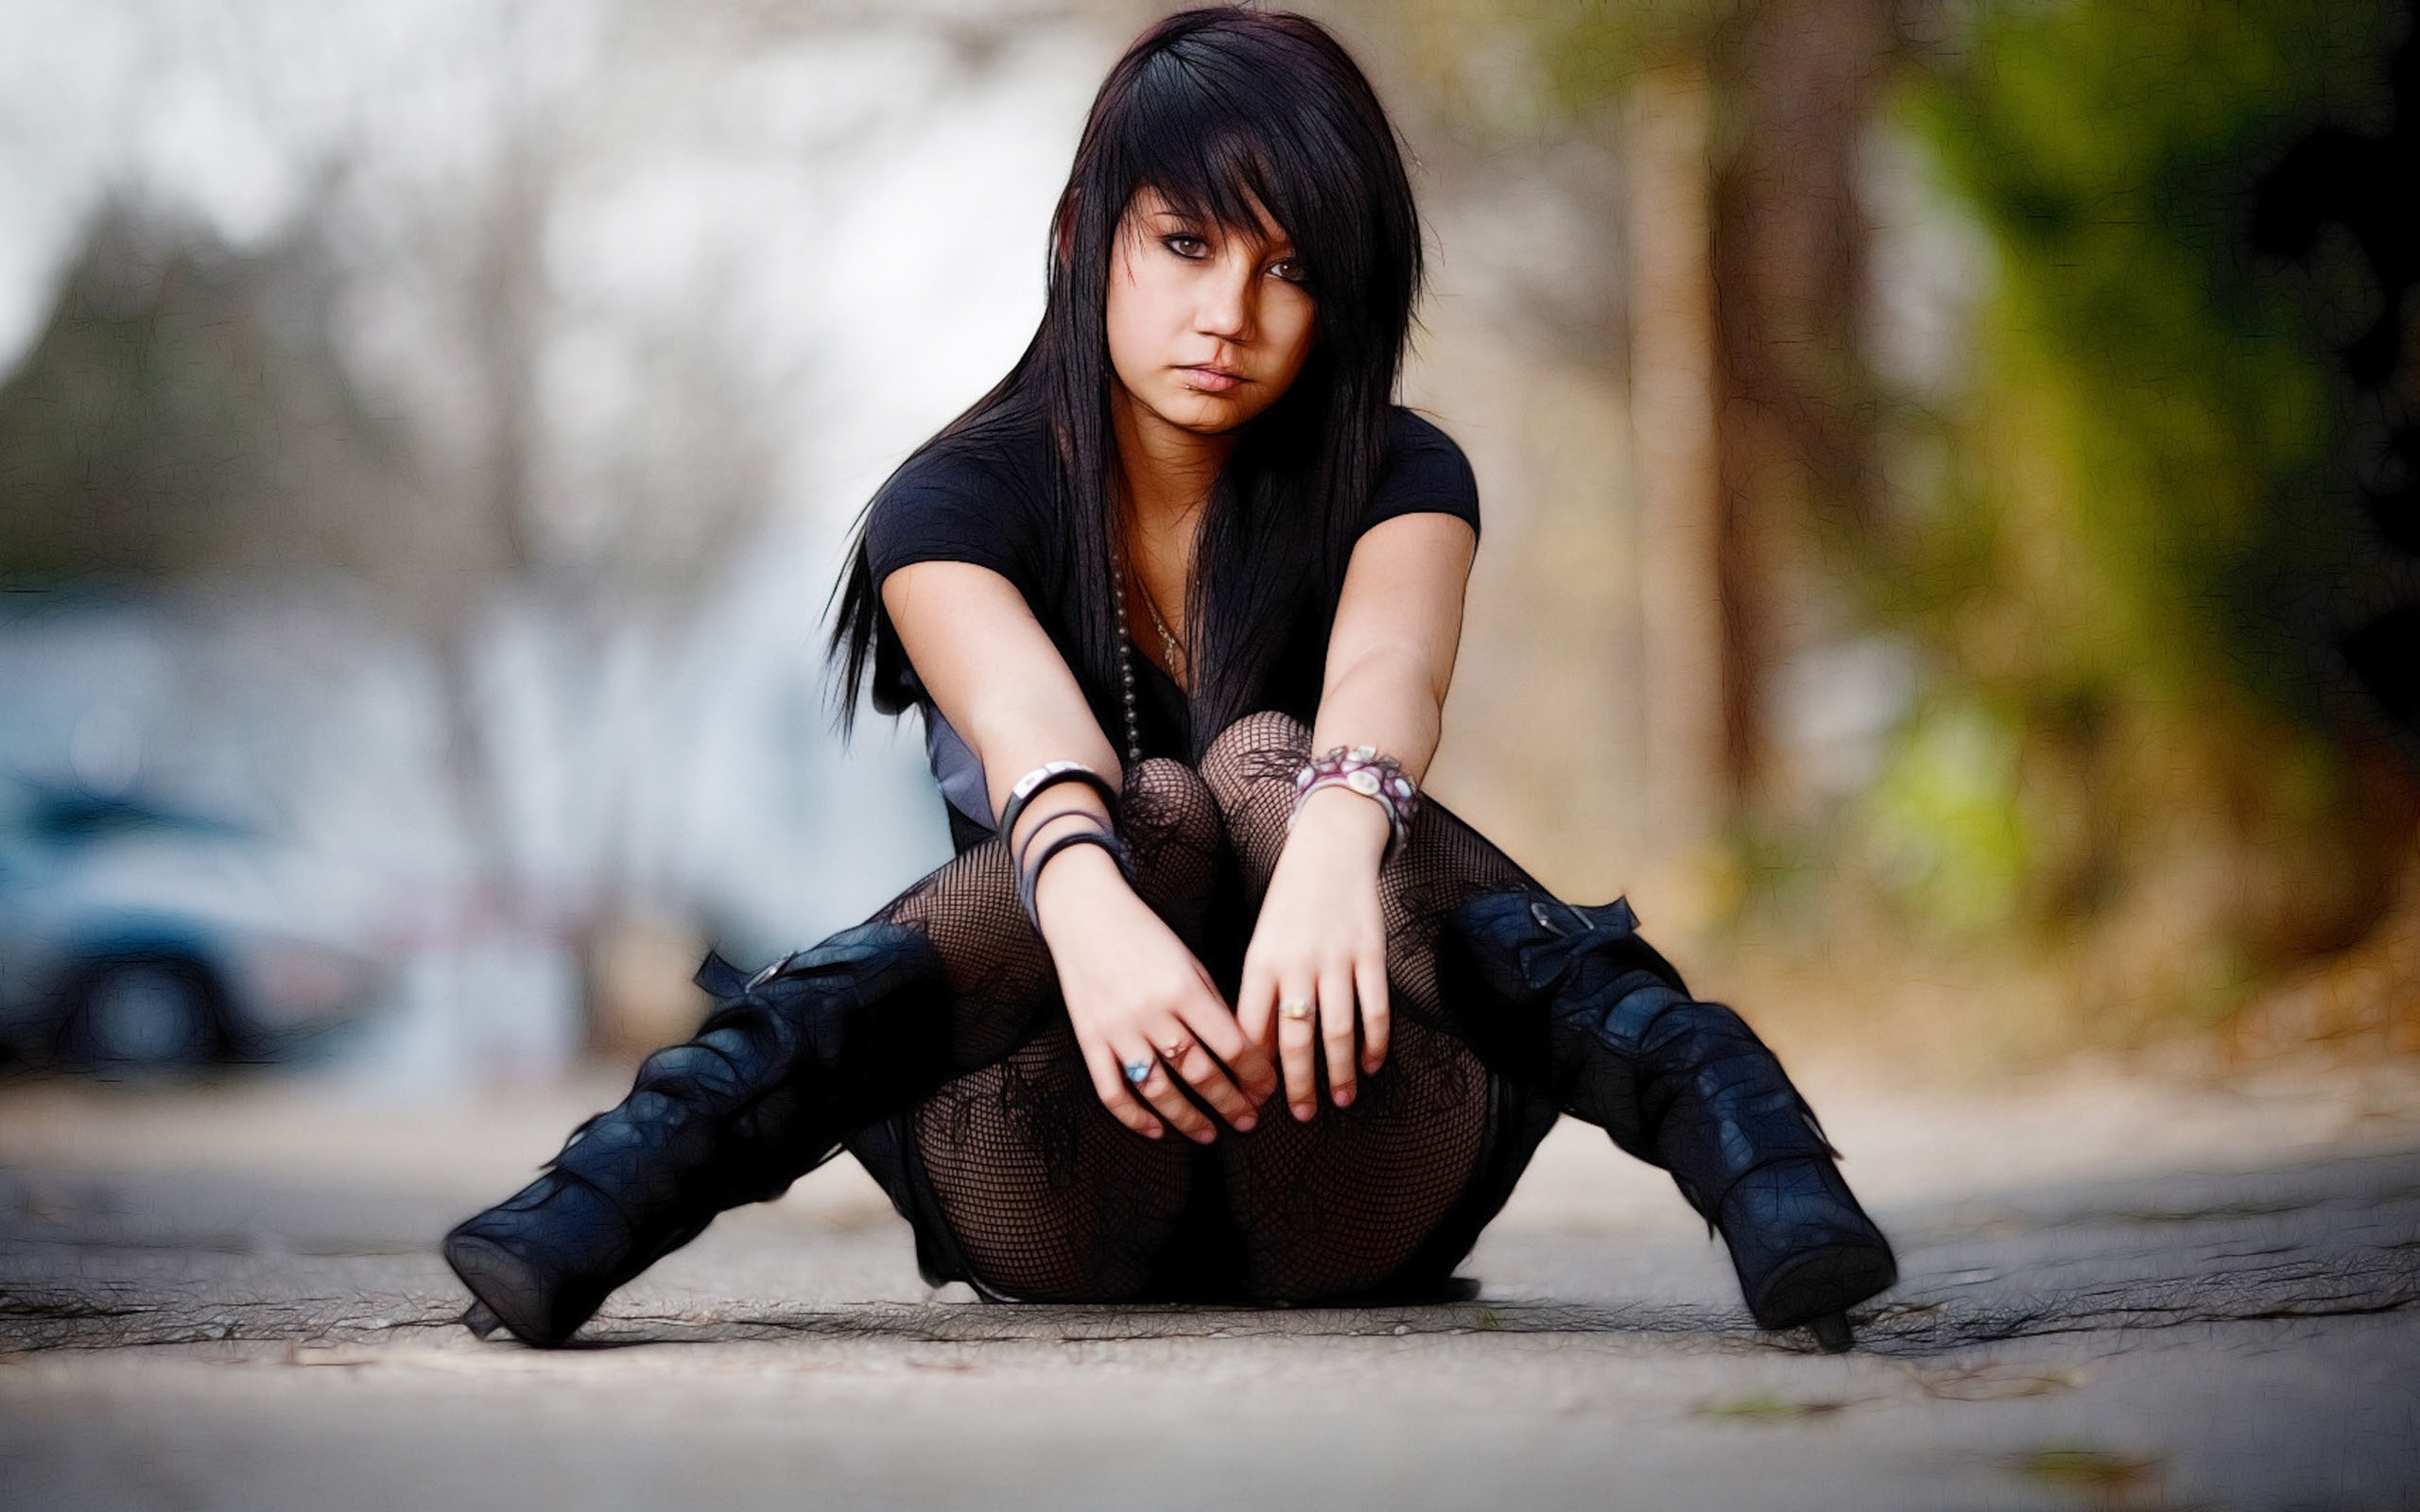 Gothic Model 4 Wallpaper From Gothic Girls Wal 4433 Hd